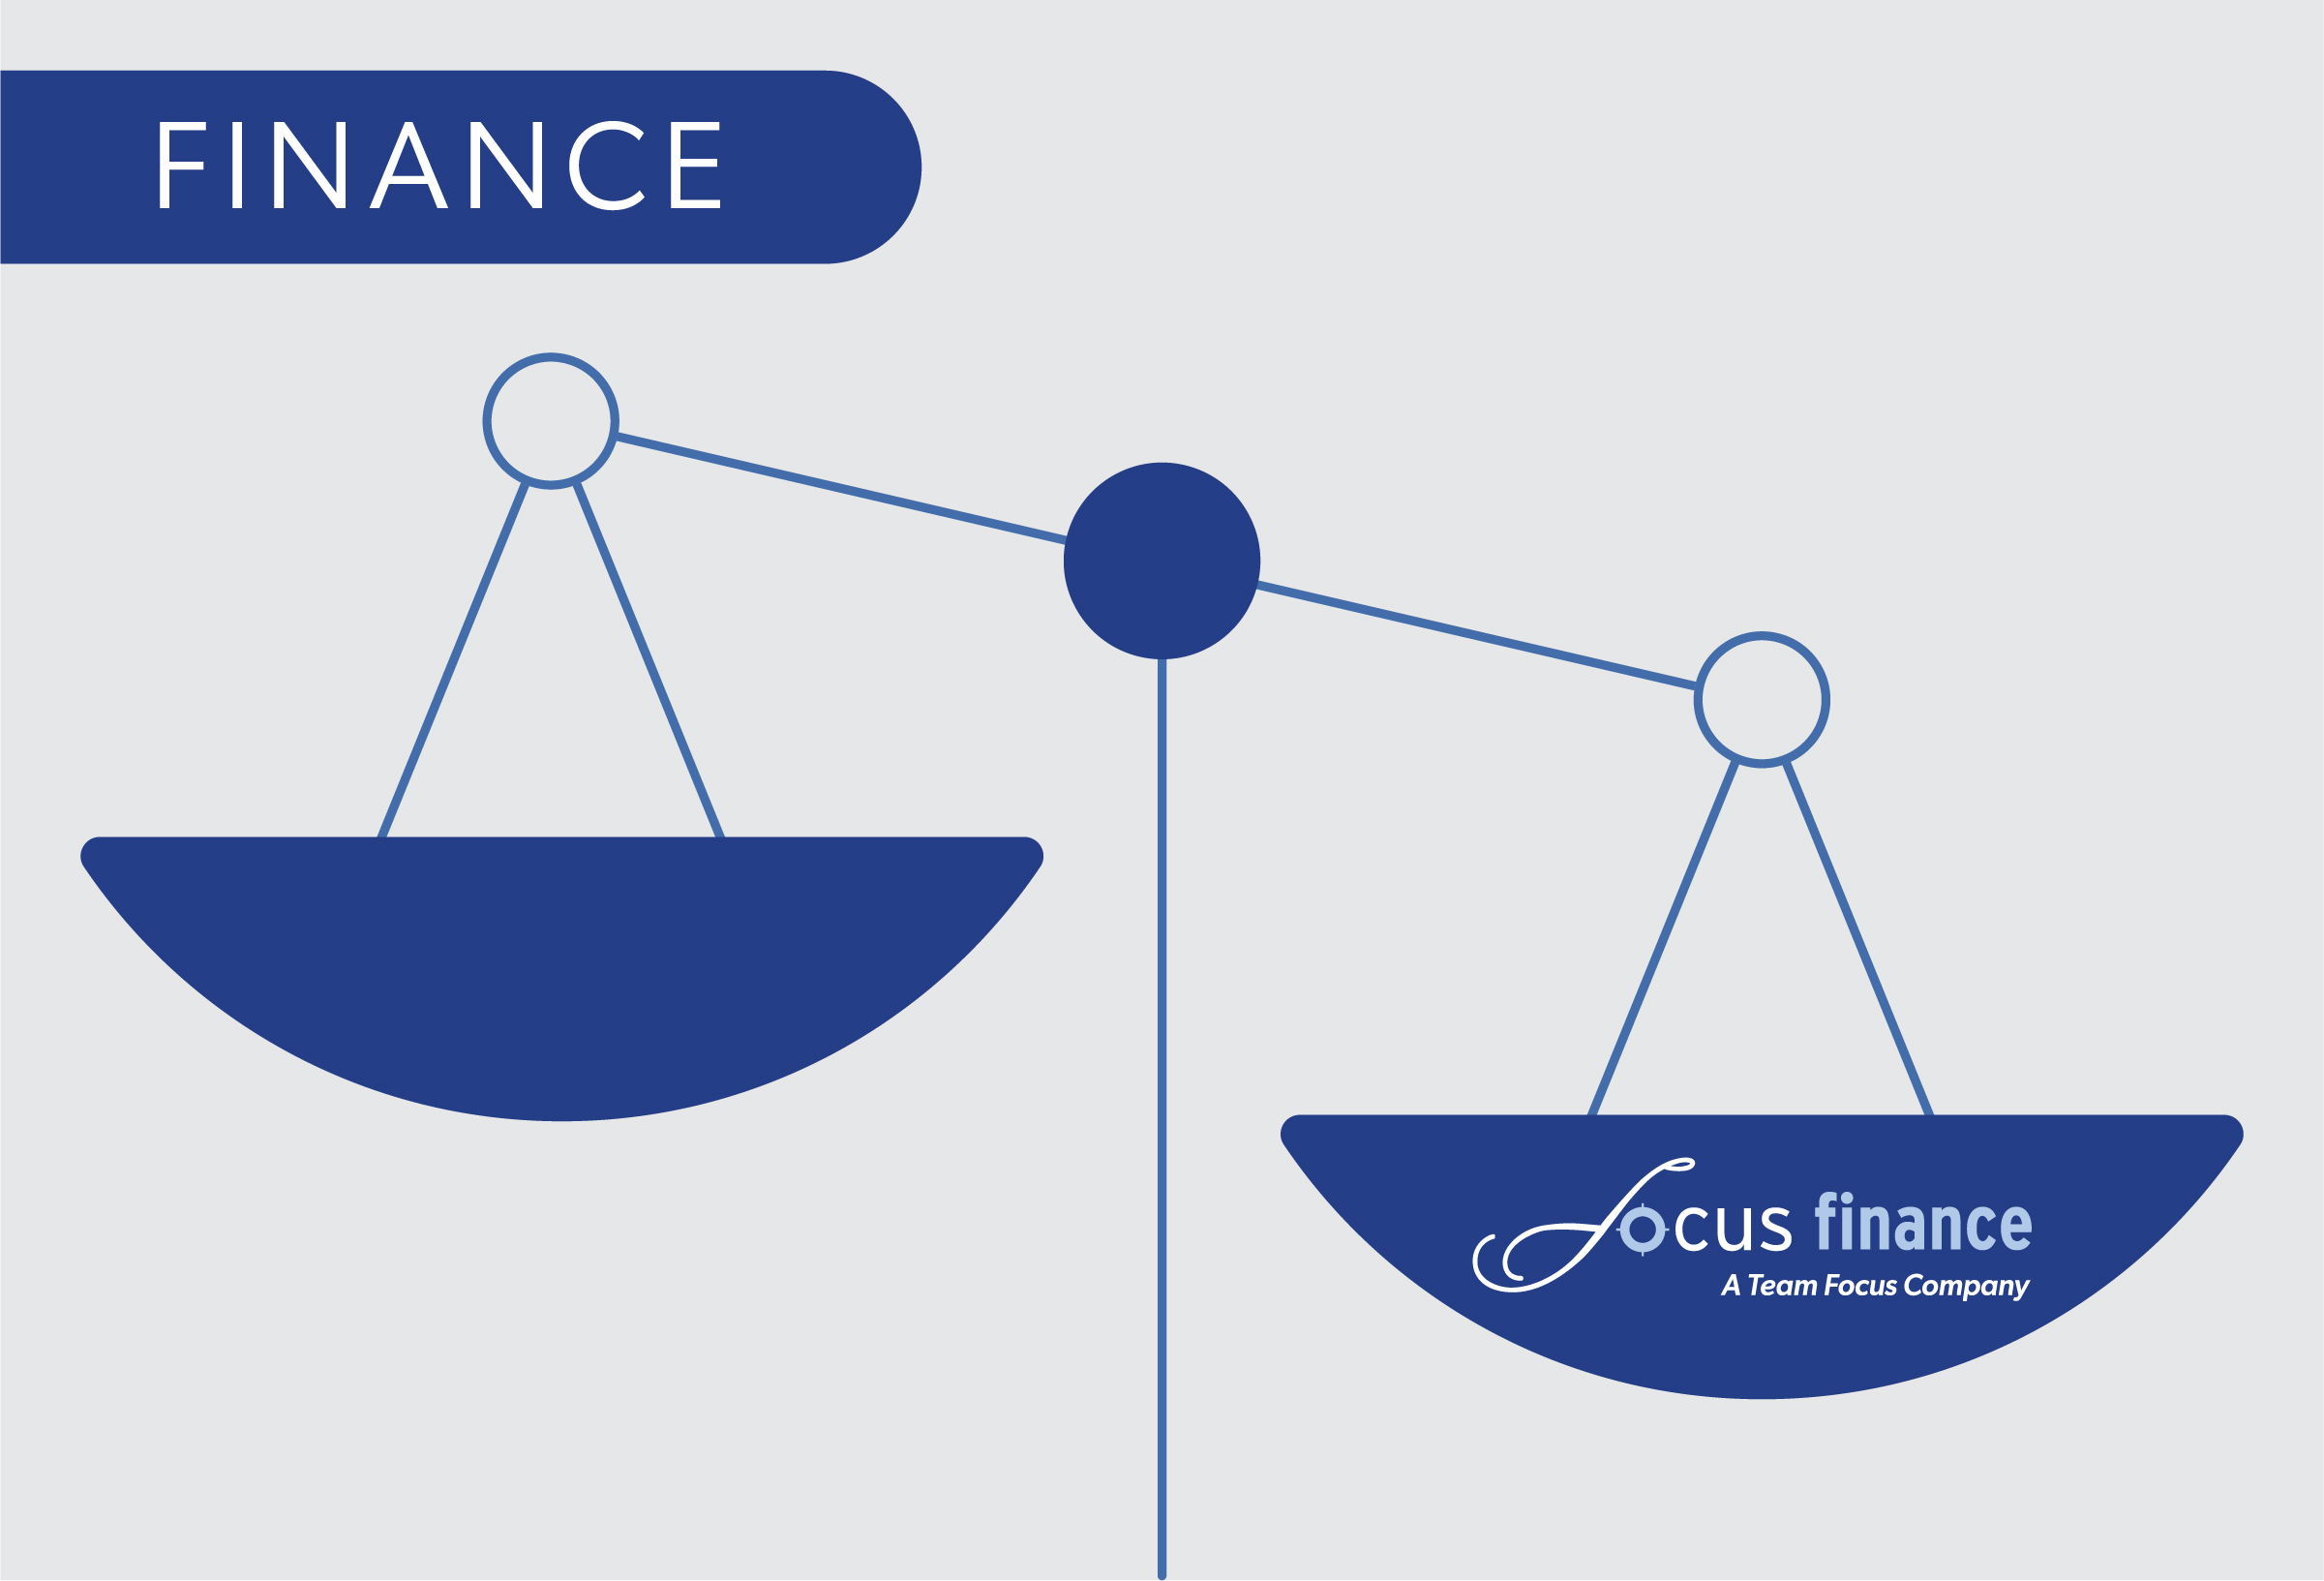 Tip the scales in your favor with Focus Finance